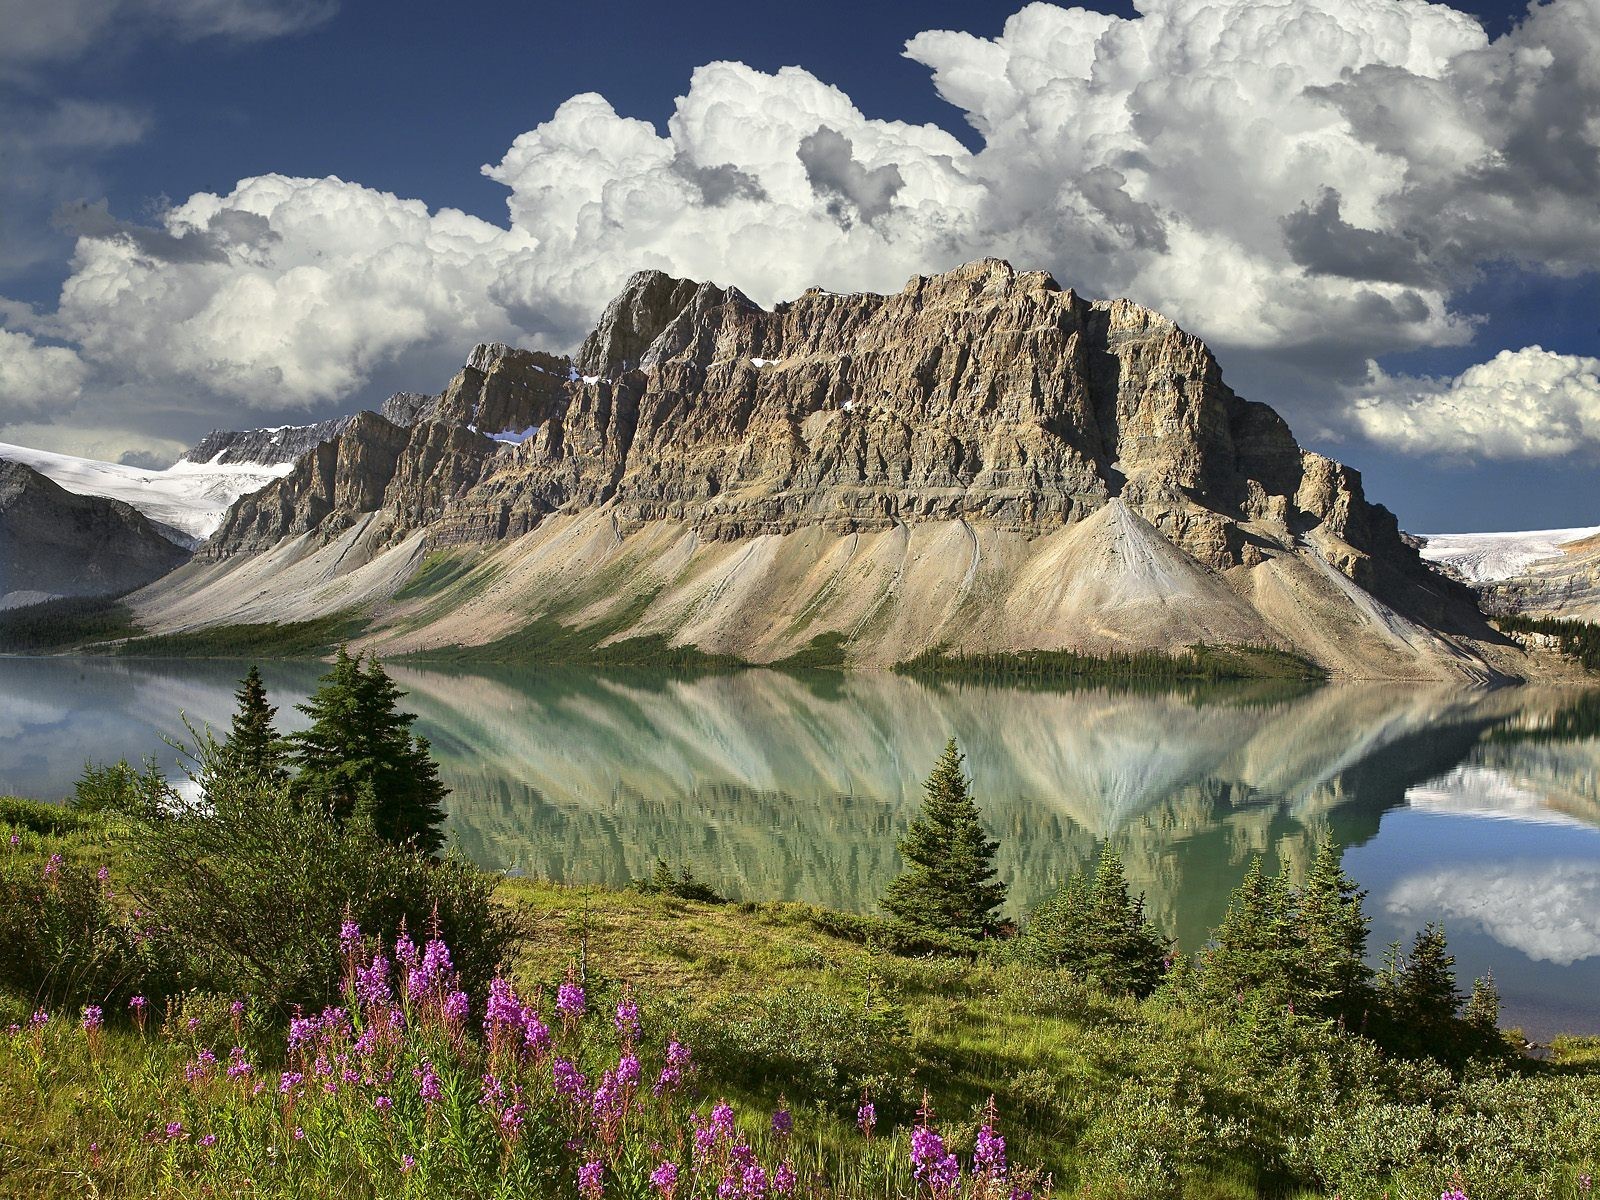 General 1600x1200 nature landscape mountains clouds Canada lake trees flowers snow reflection